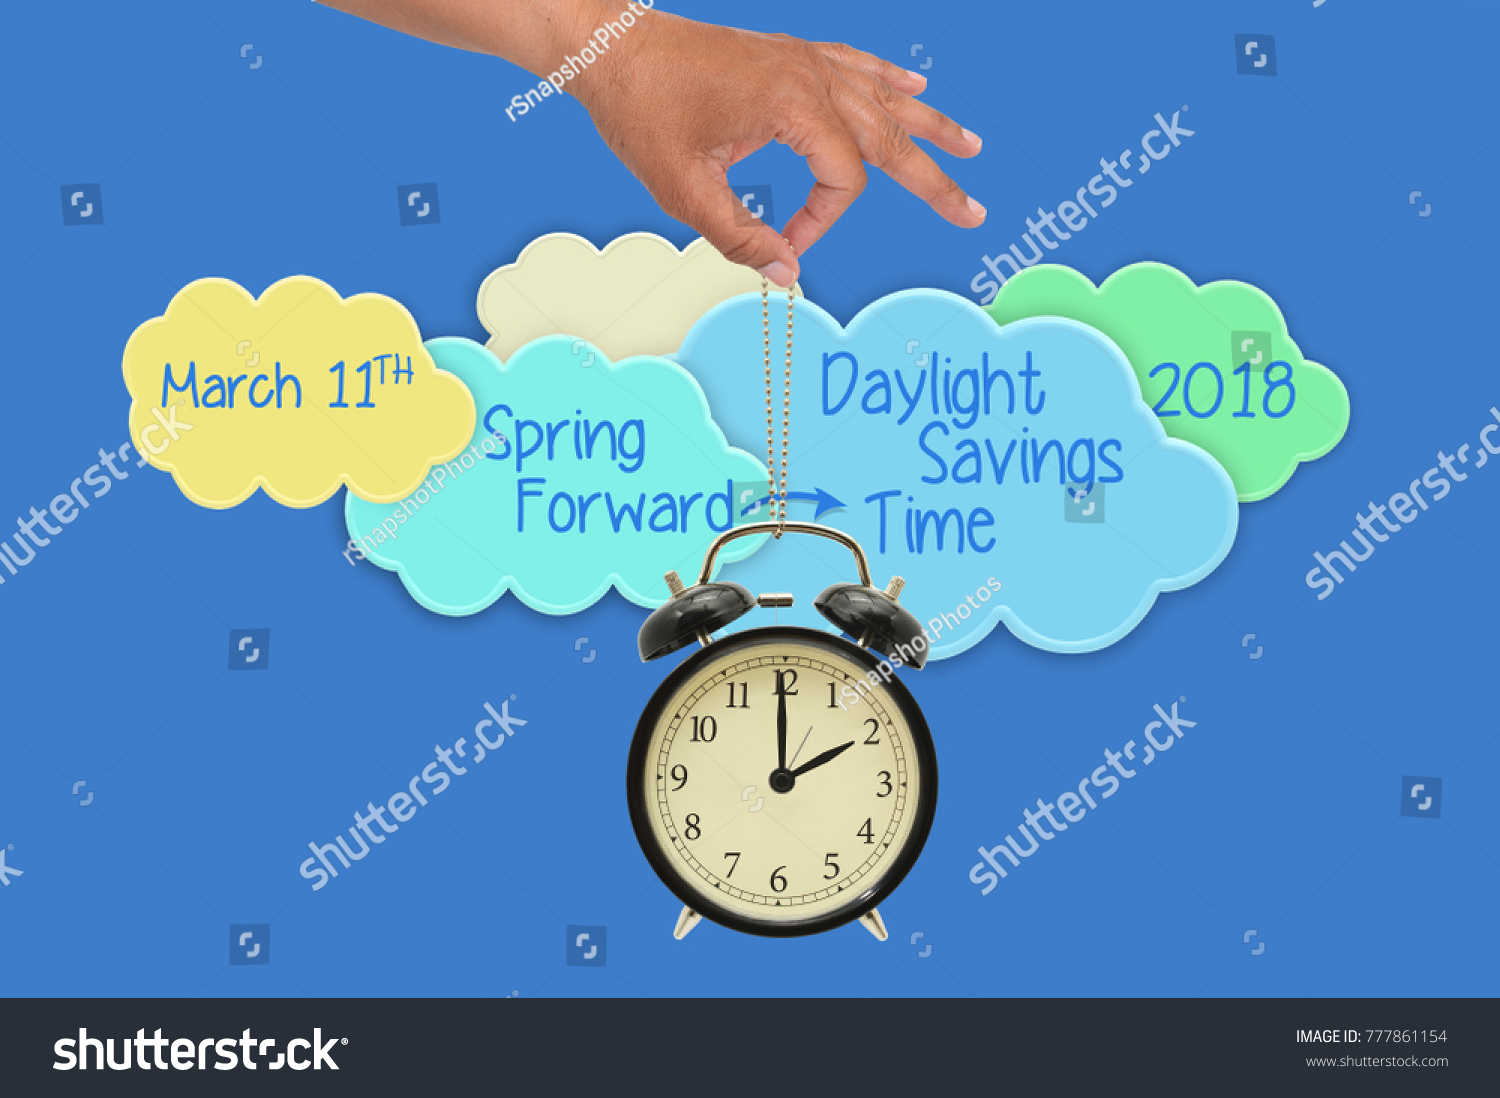 Spring Forward Daylight Savings Time March 11 2018 Clouds Hand dangling 2 o'clock alarm clock blue background #777861154